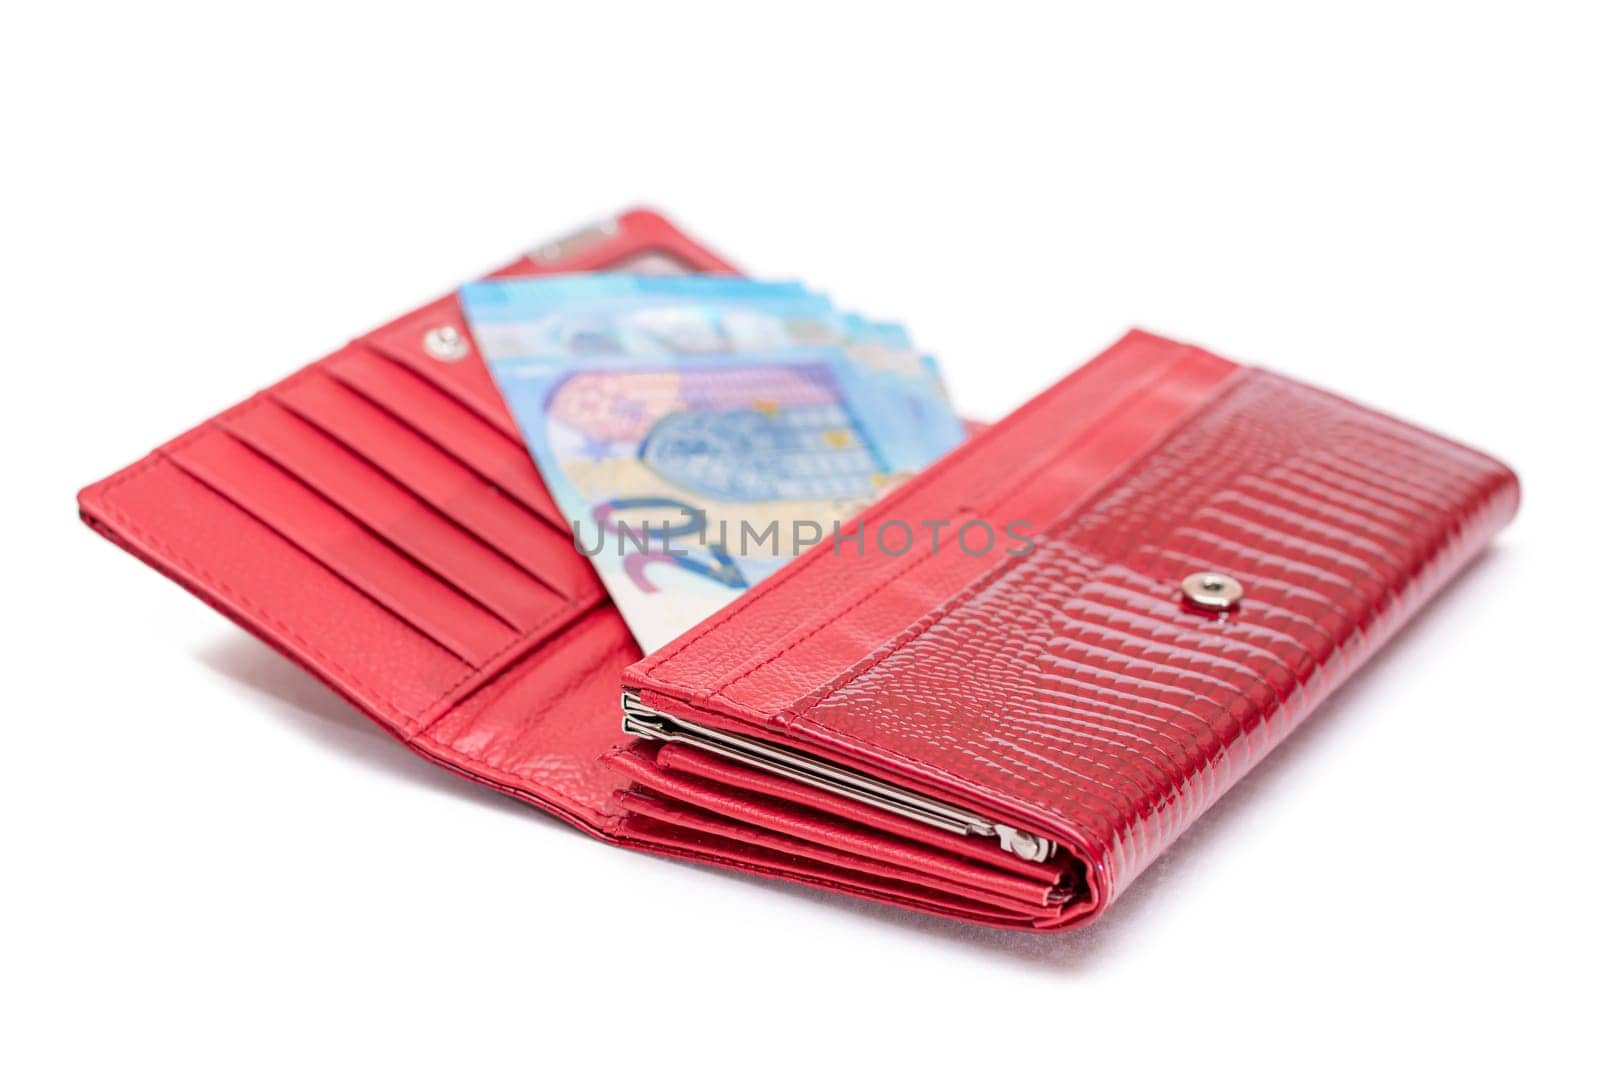 Opened Red Women Purse with 20 Euro Banknotes Inside - Isolated on White by InfinitumProdux